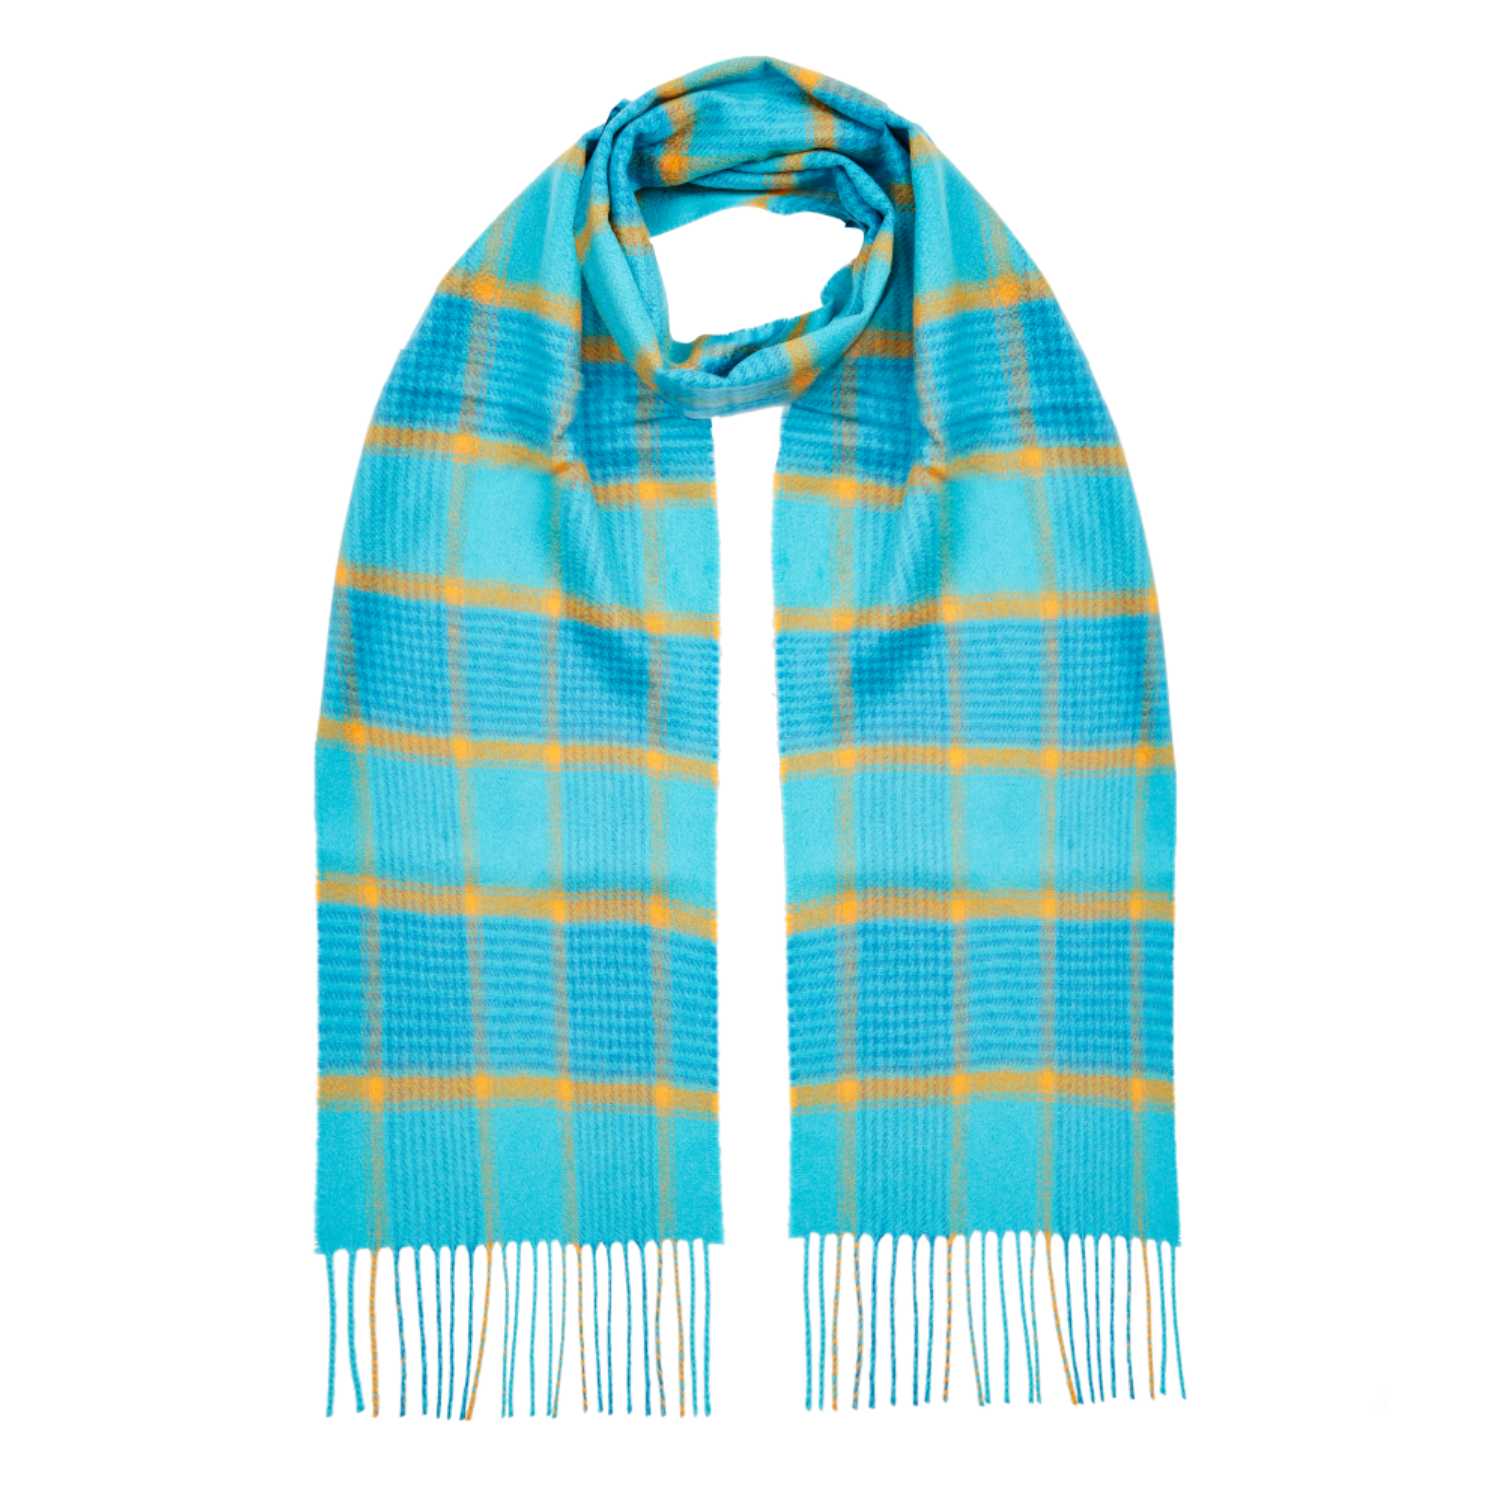 Checked Cashmere Scarf - Turquoise Yellow Overcheck